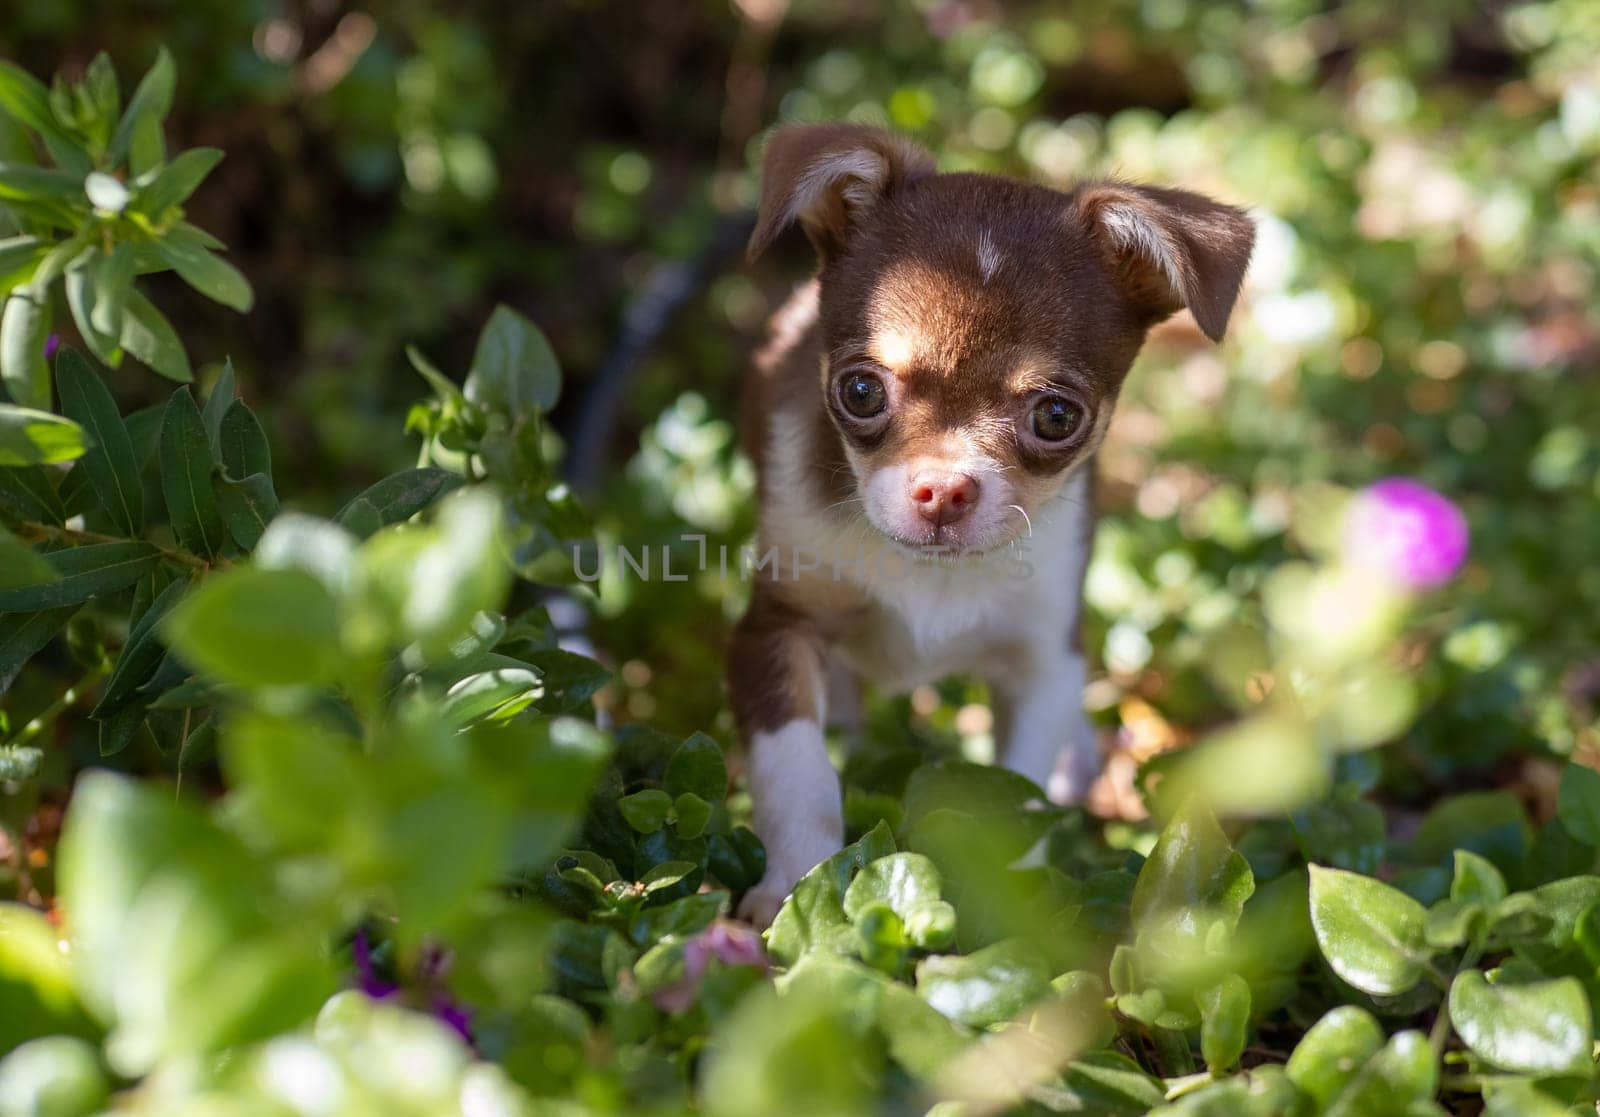 Chihuahua Puppy Amidst Flowering Shrubs by gcm